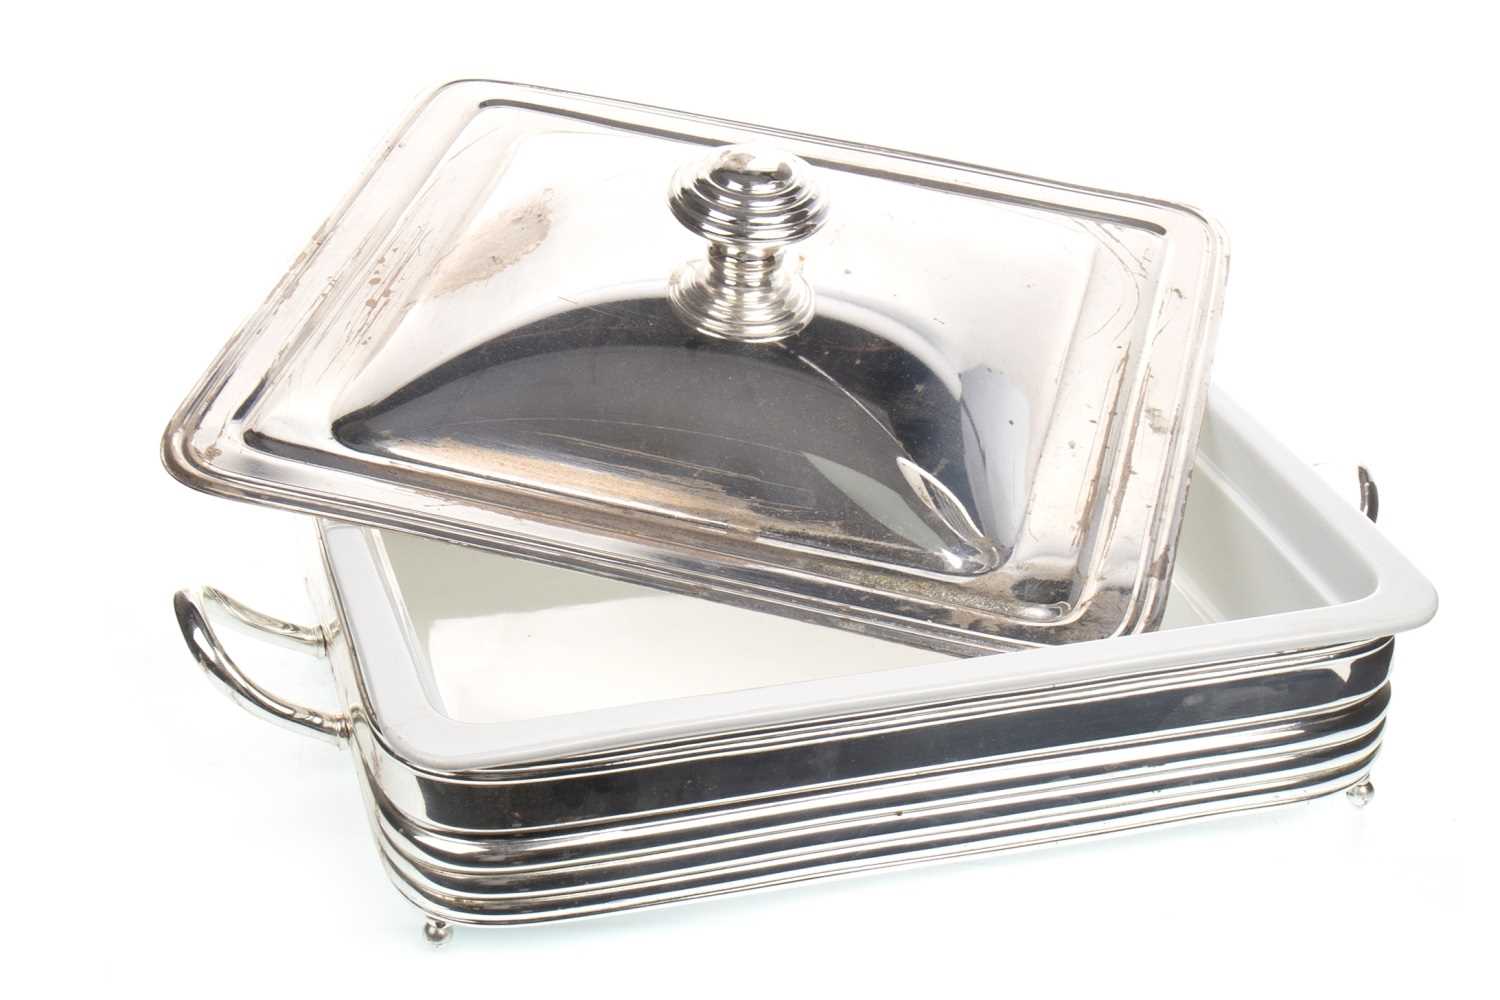 Lot 1818 - A LARGE SILVER PLATED SQUARE SERVING DISH WITH LID